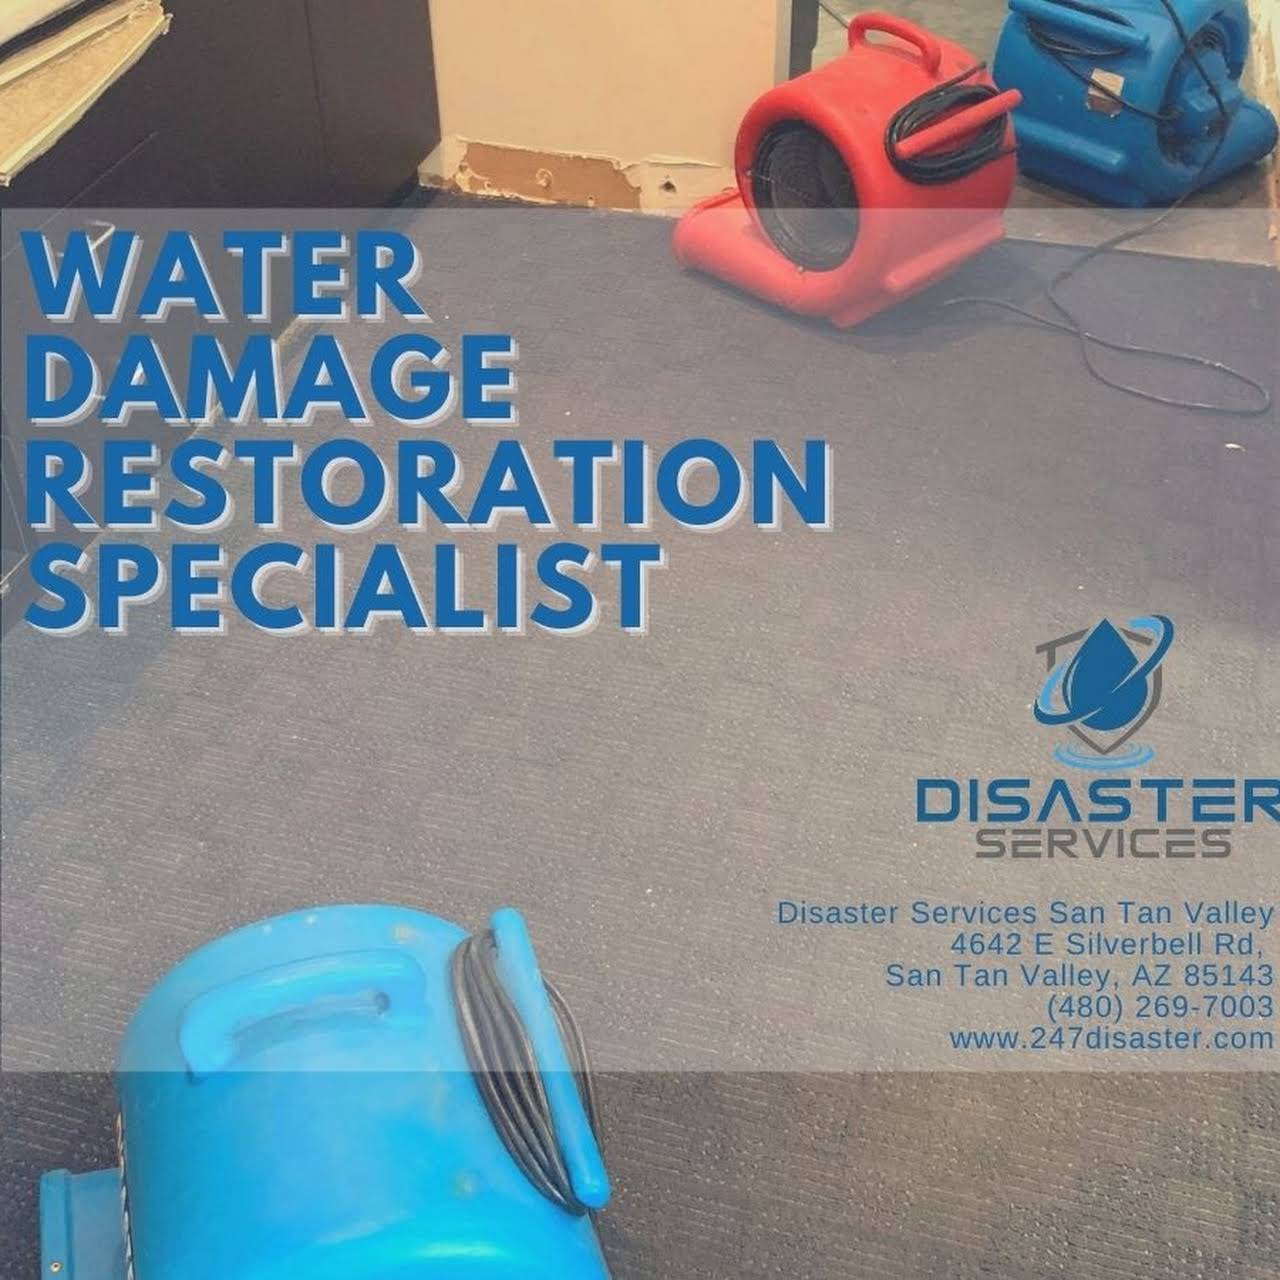 Water Damage Restoration Company in San Tan Valley AZ, Water Damage Repair  and Cleanup - Gateway Restoration